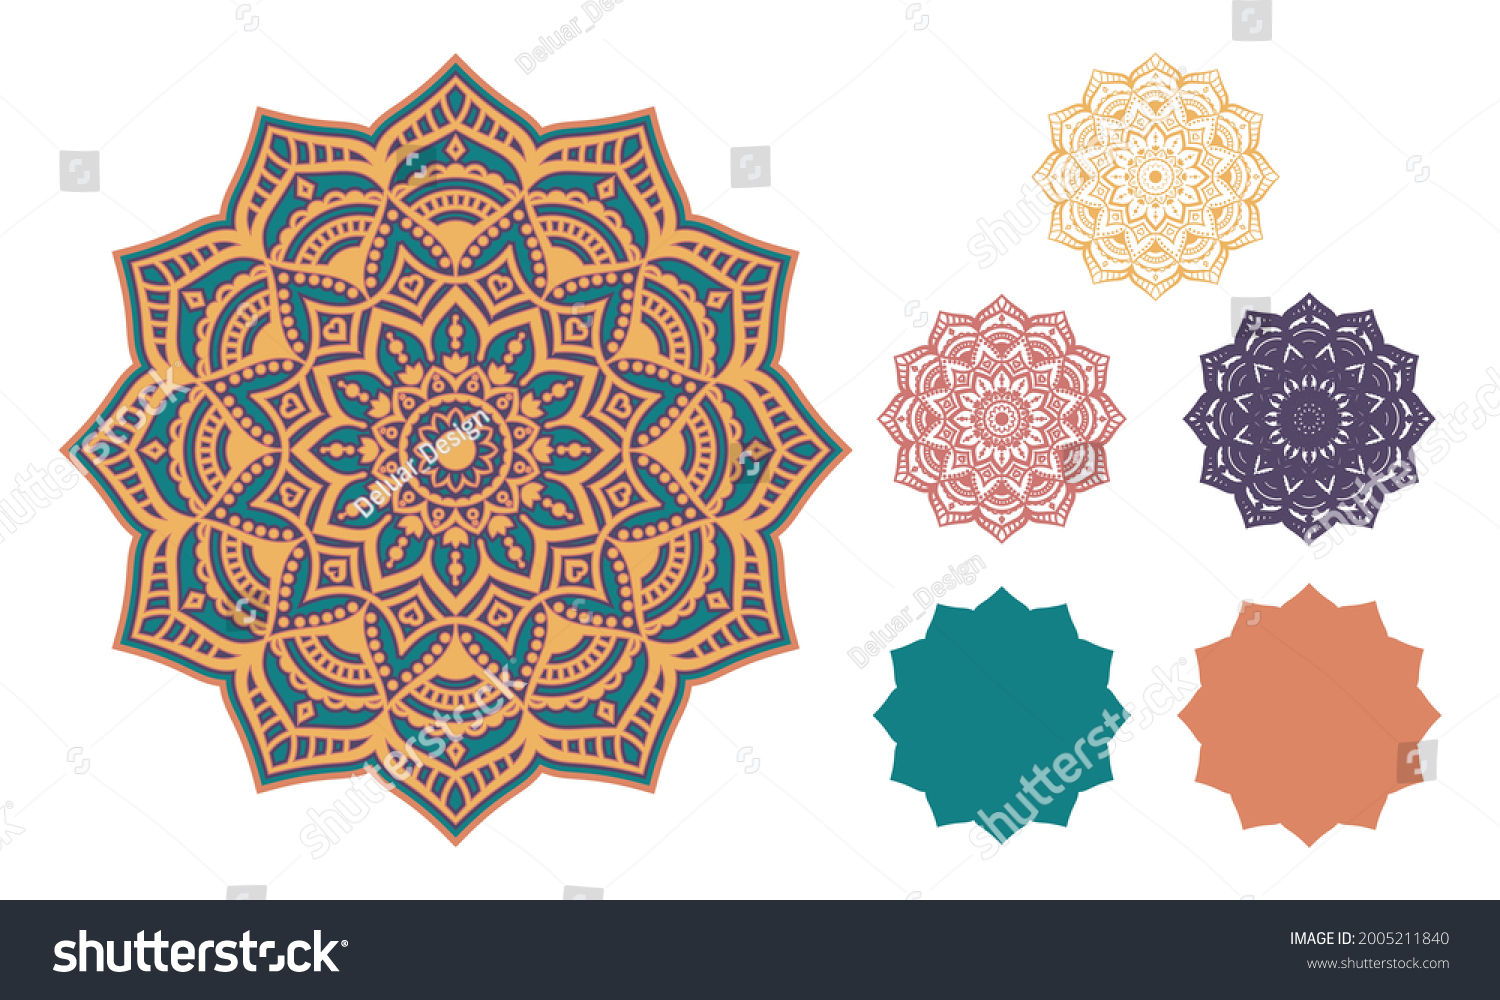 SVG of 3d Layered Mandala SVG. Mandala Multilayer Cut File, Five layers. Multilayer elements for paper cutting or machine cutting– 3d SVG Flowers svg